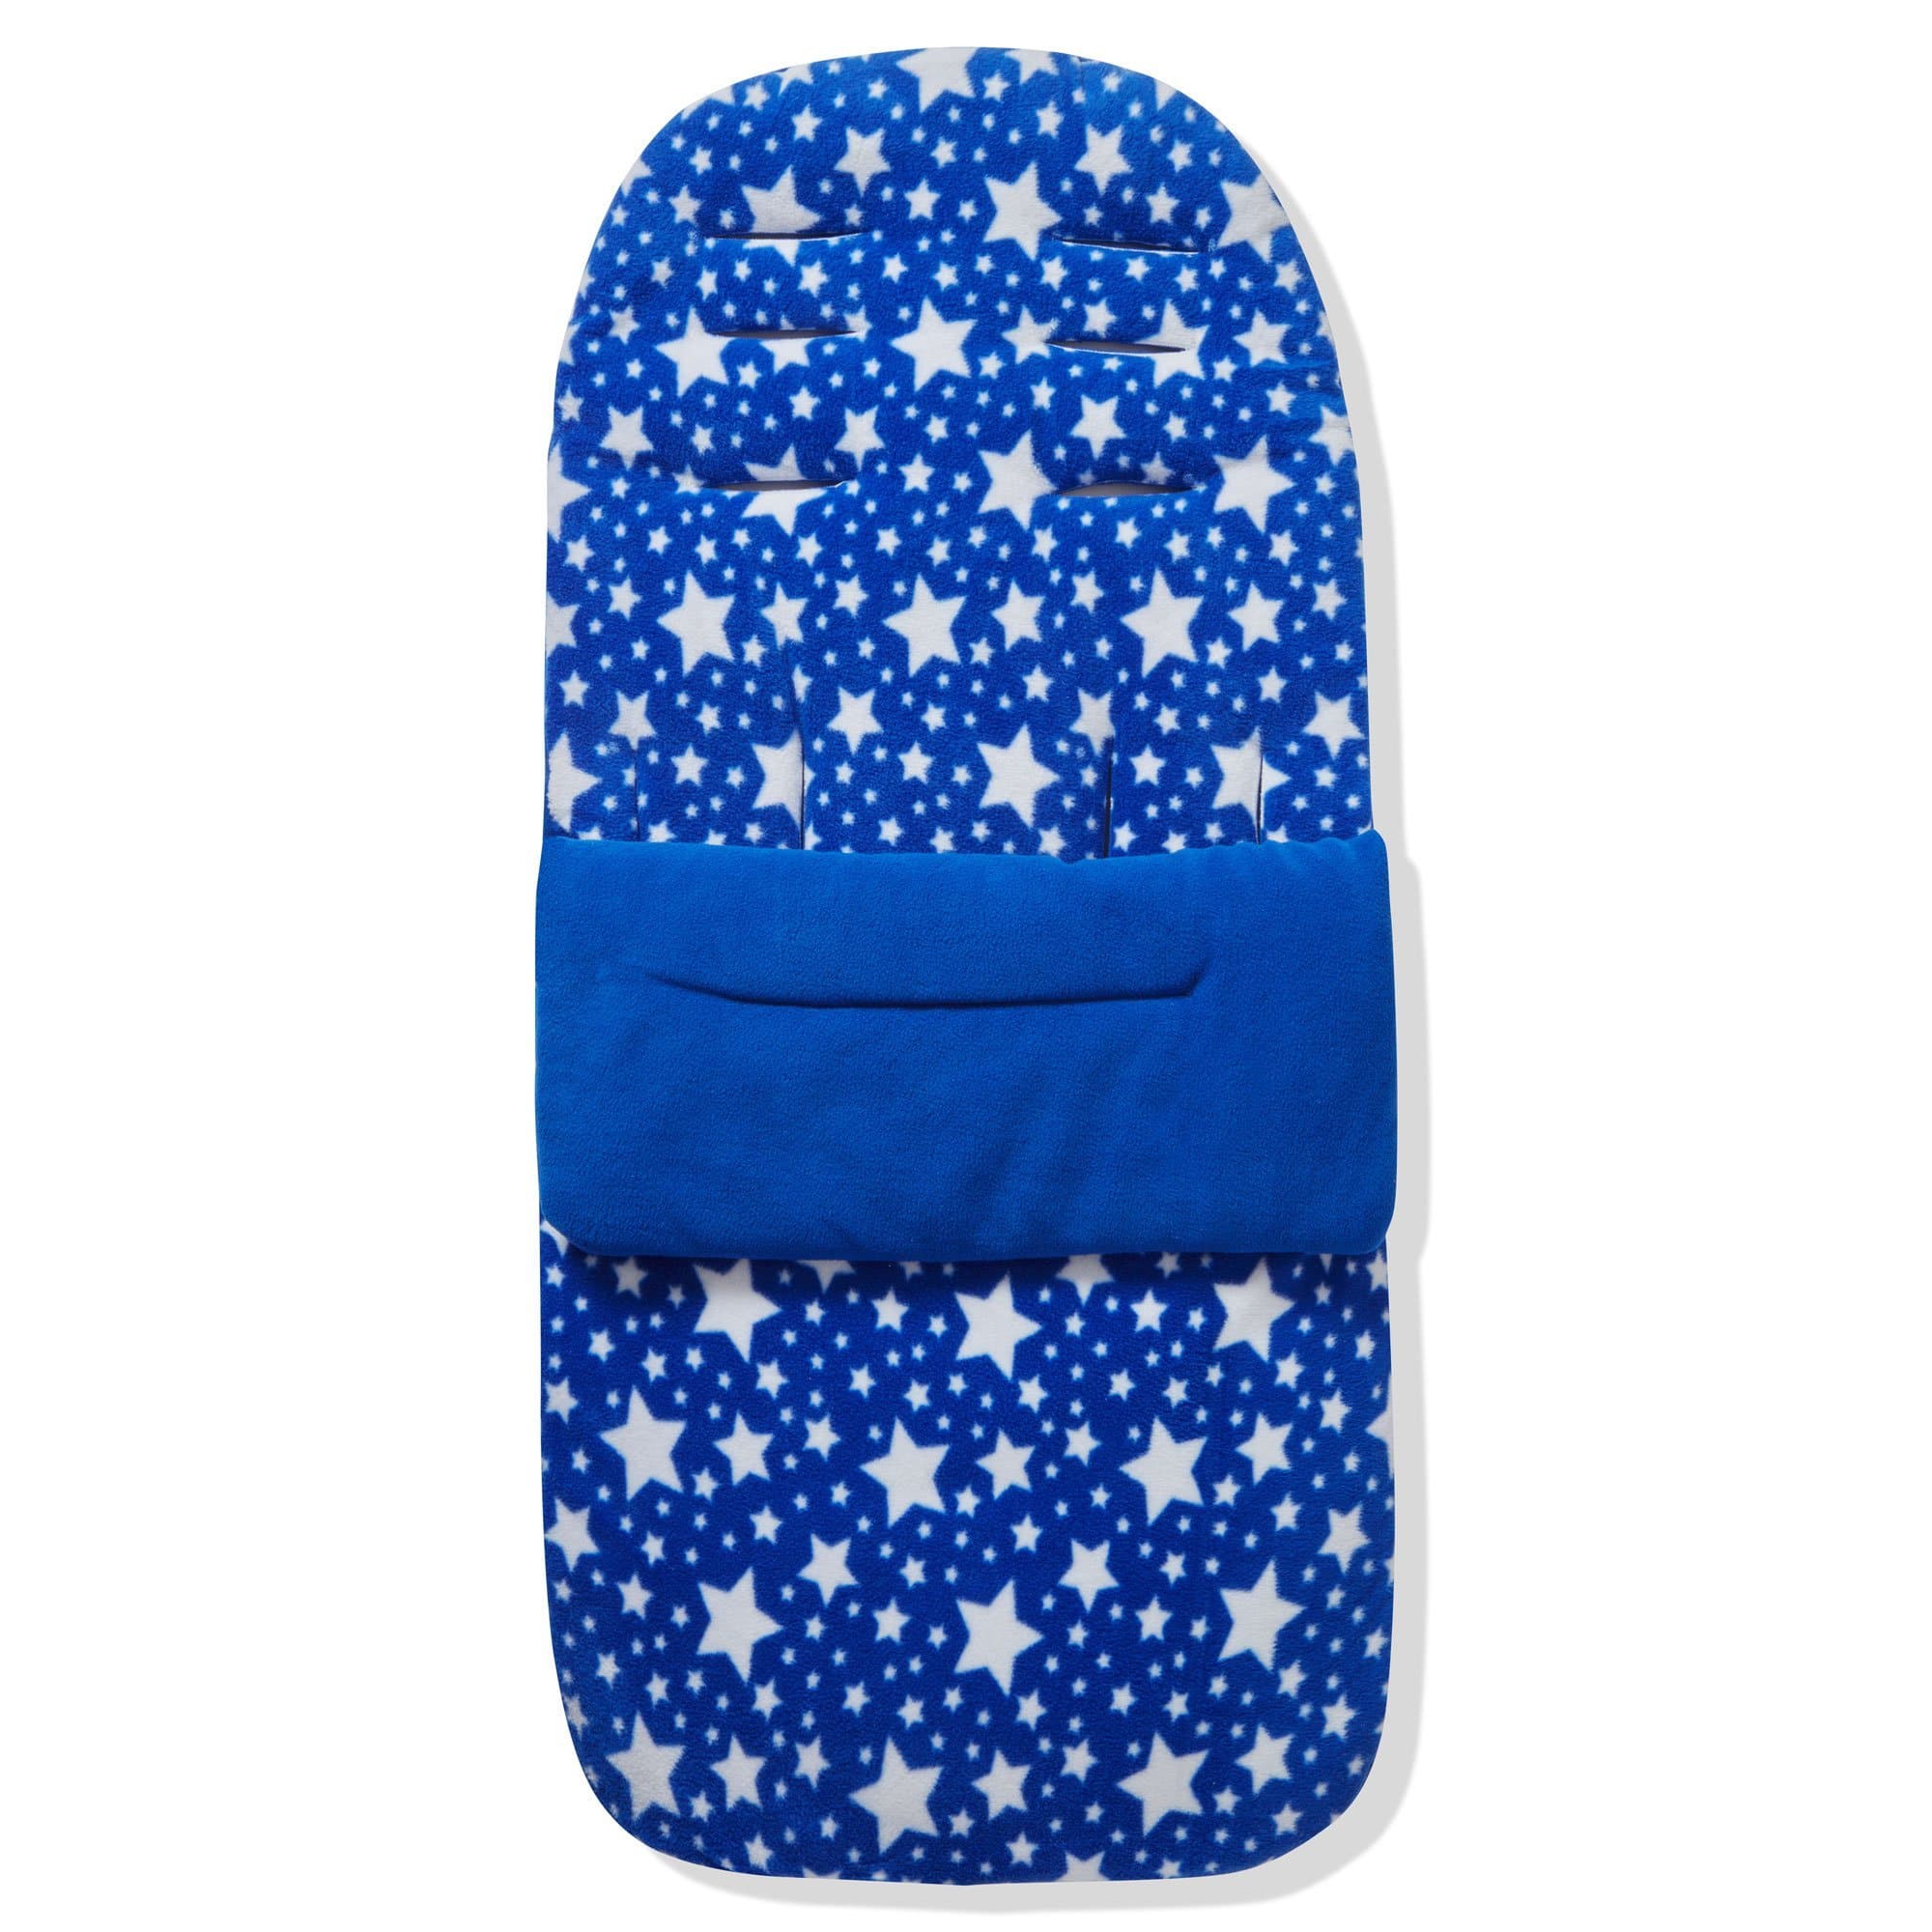 Fleece Footmuff / Cosy Toes Compatible with Little Shield - For Your Little One